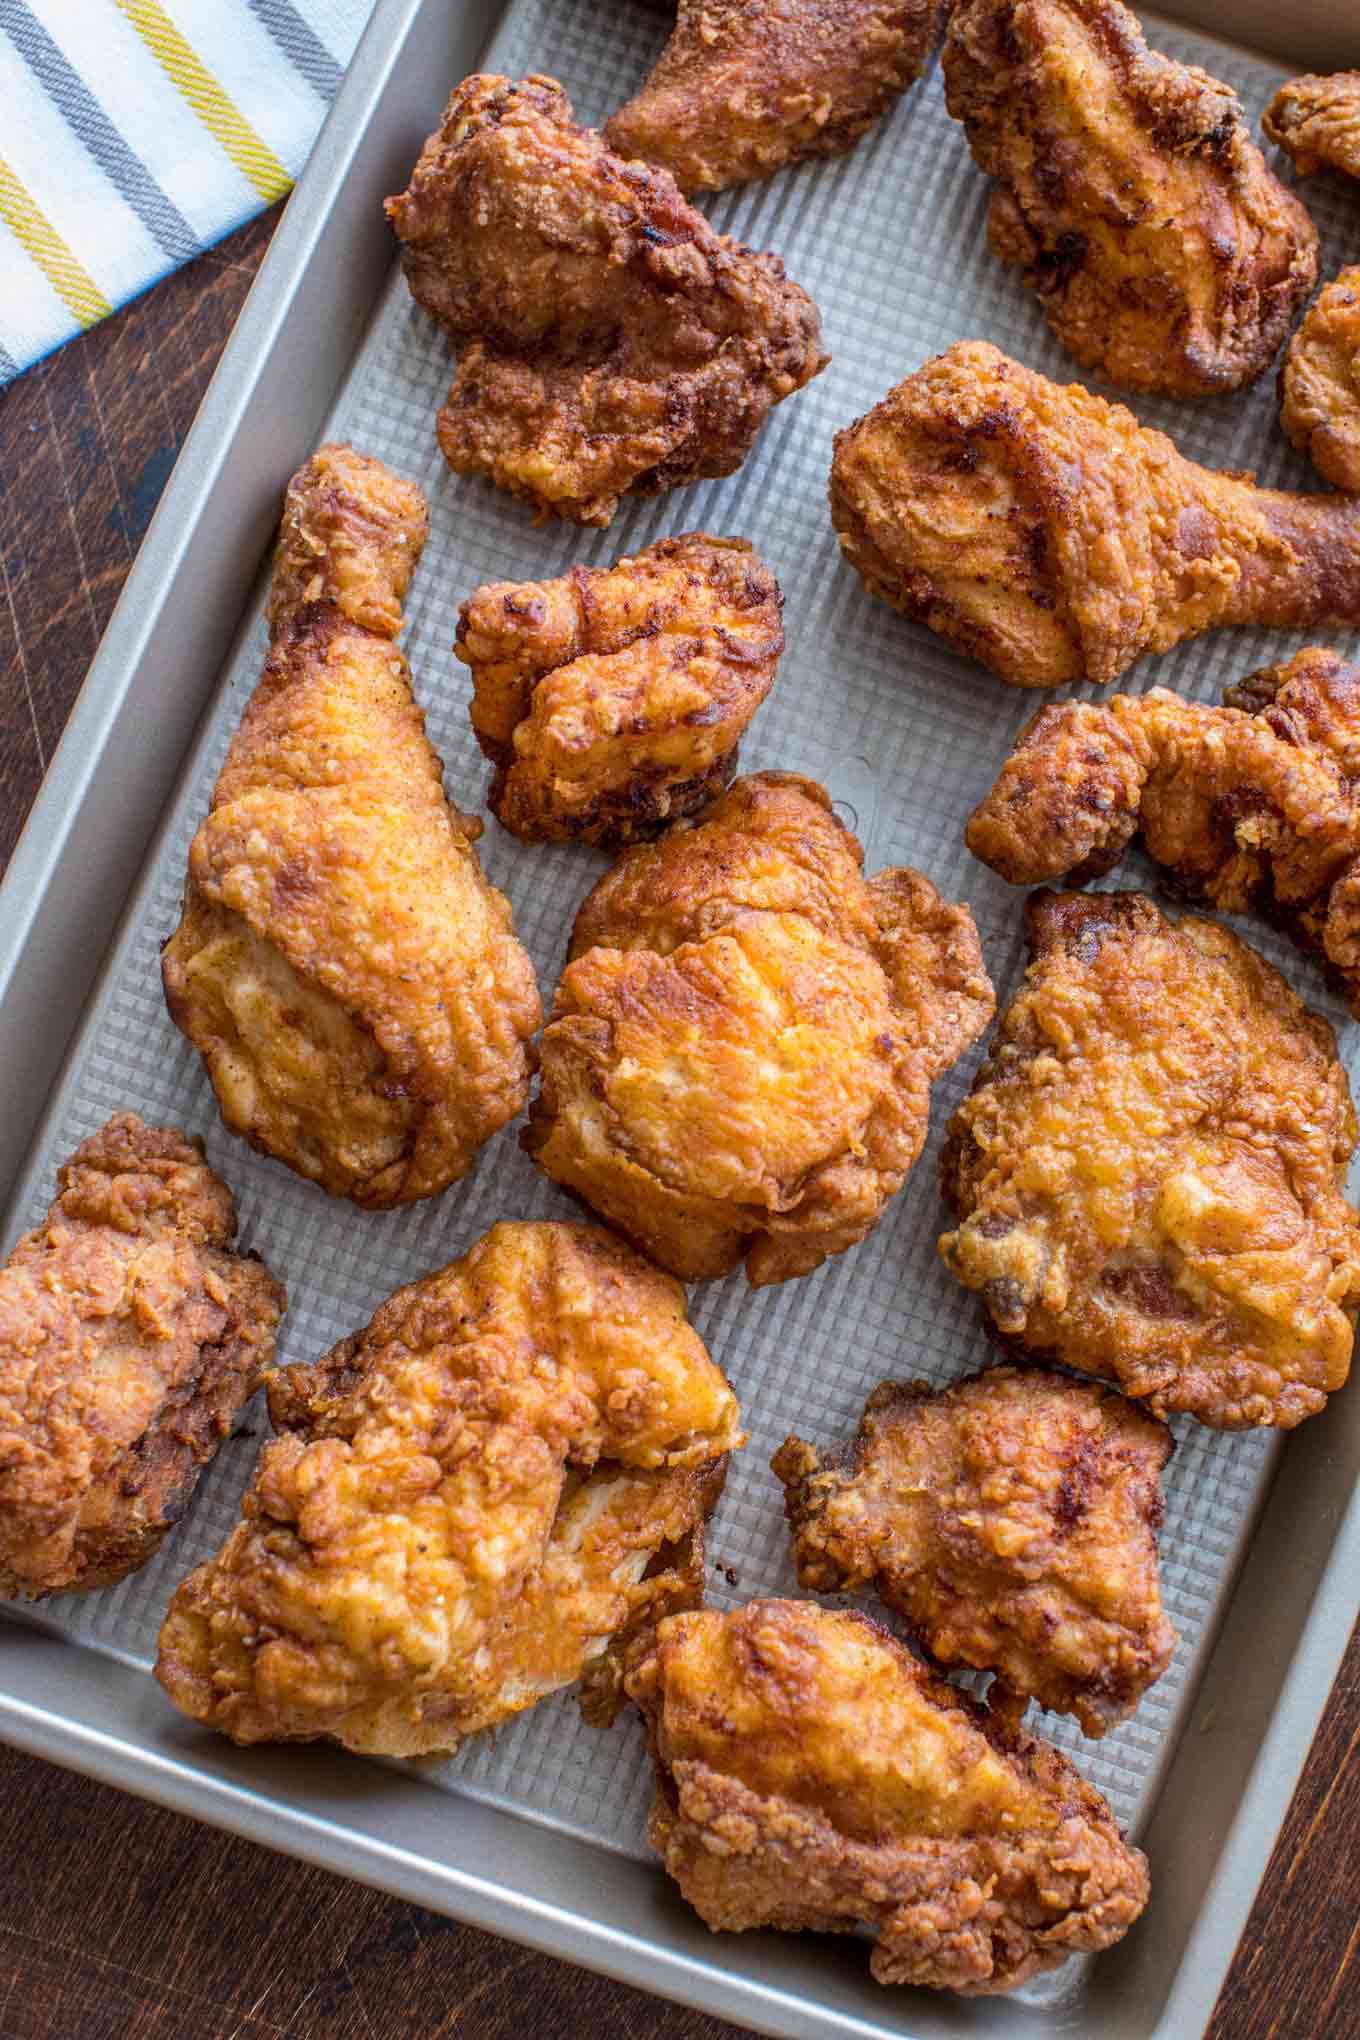 How do you make fried chicken breading more “craggley”? : AskCulinary